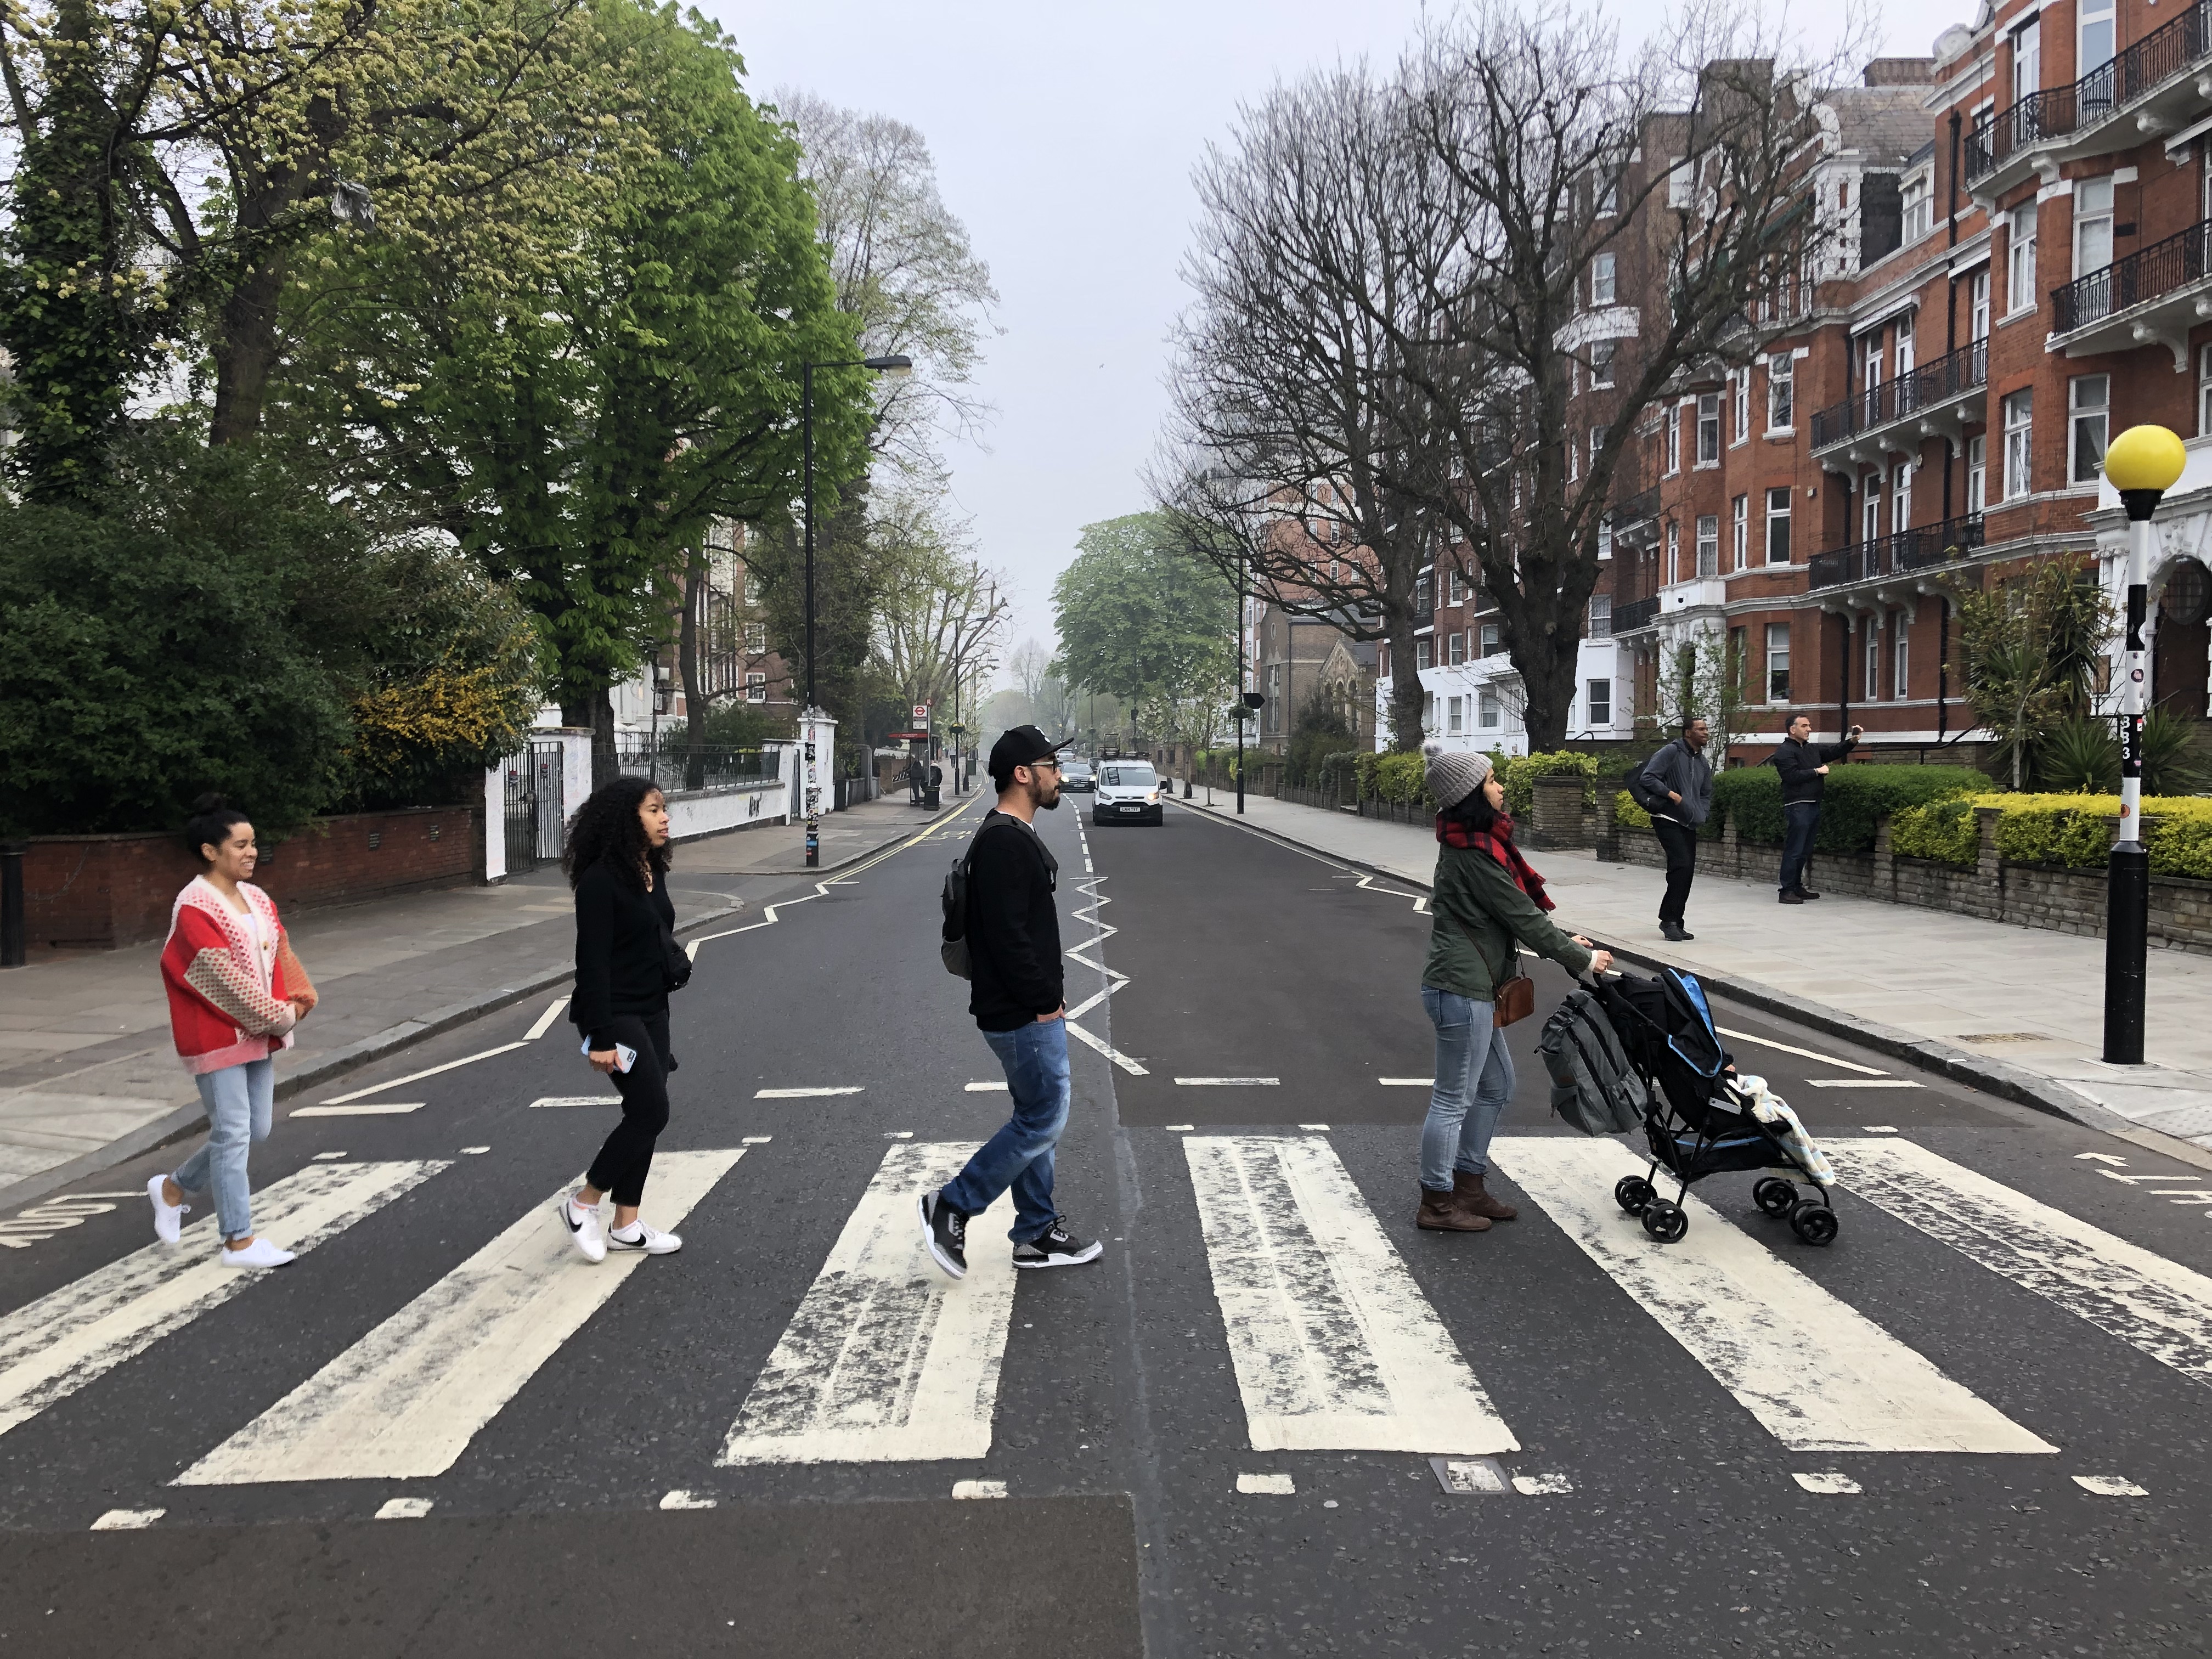 Top 5 Tips For The Beatles Abbey Road Crossing In London!